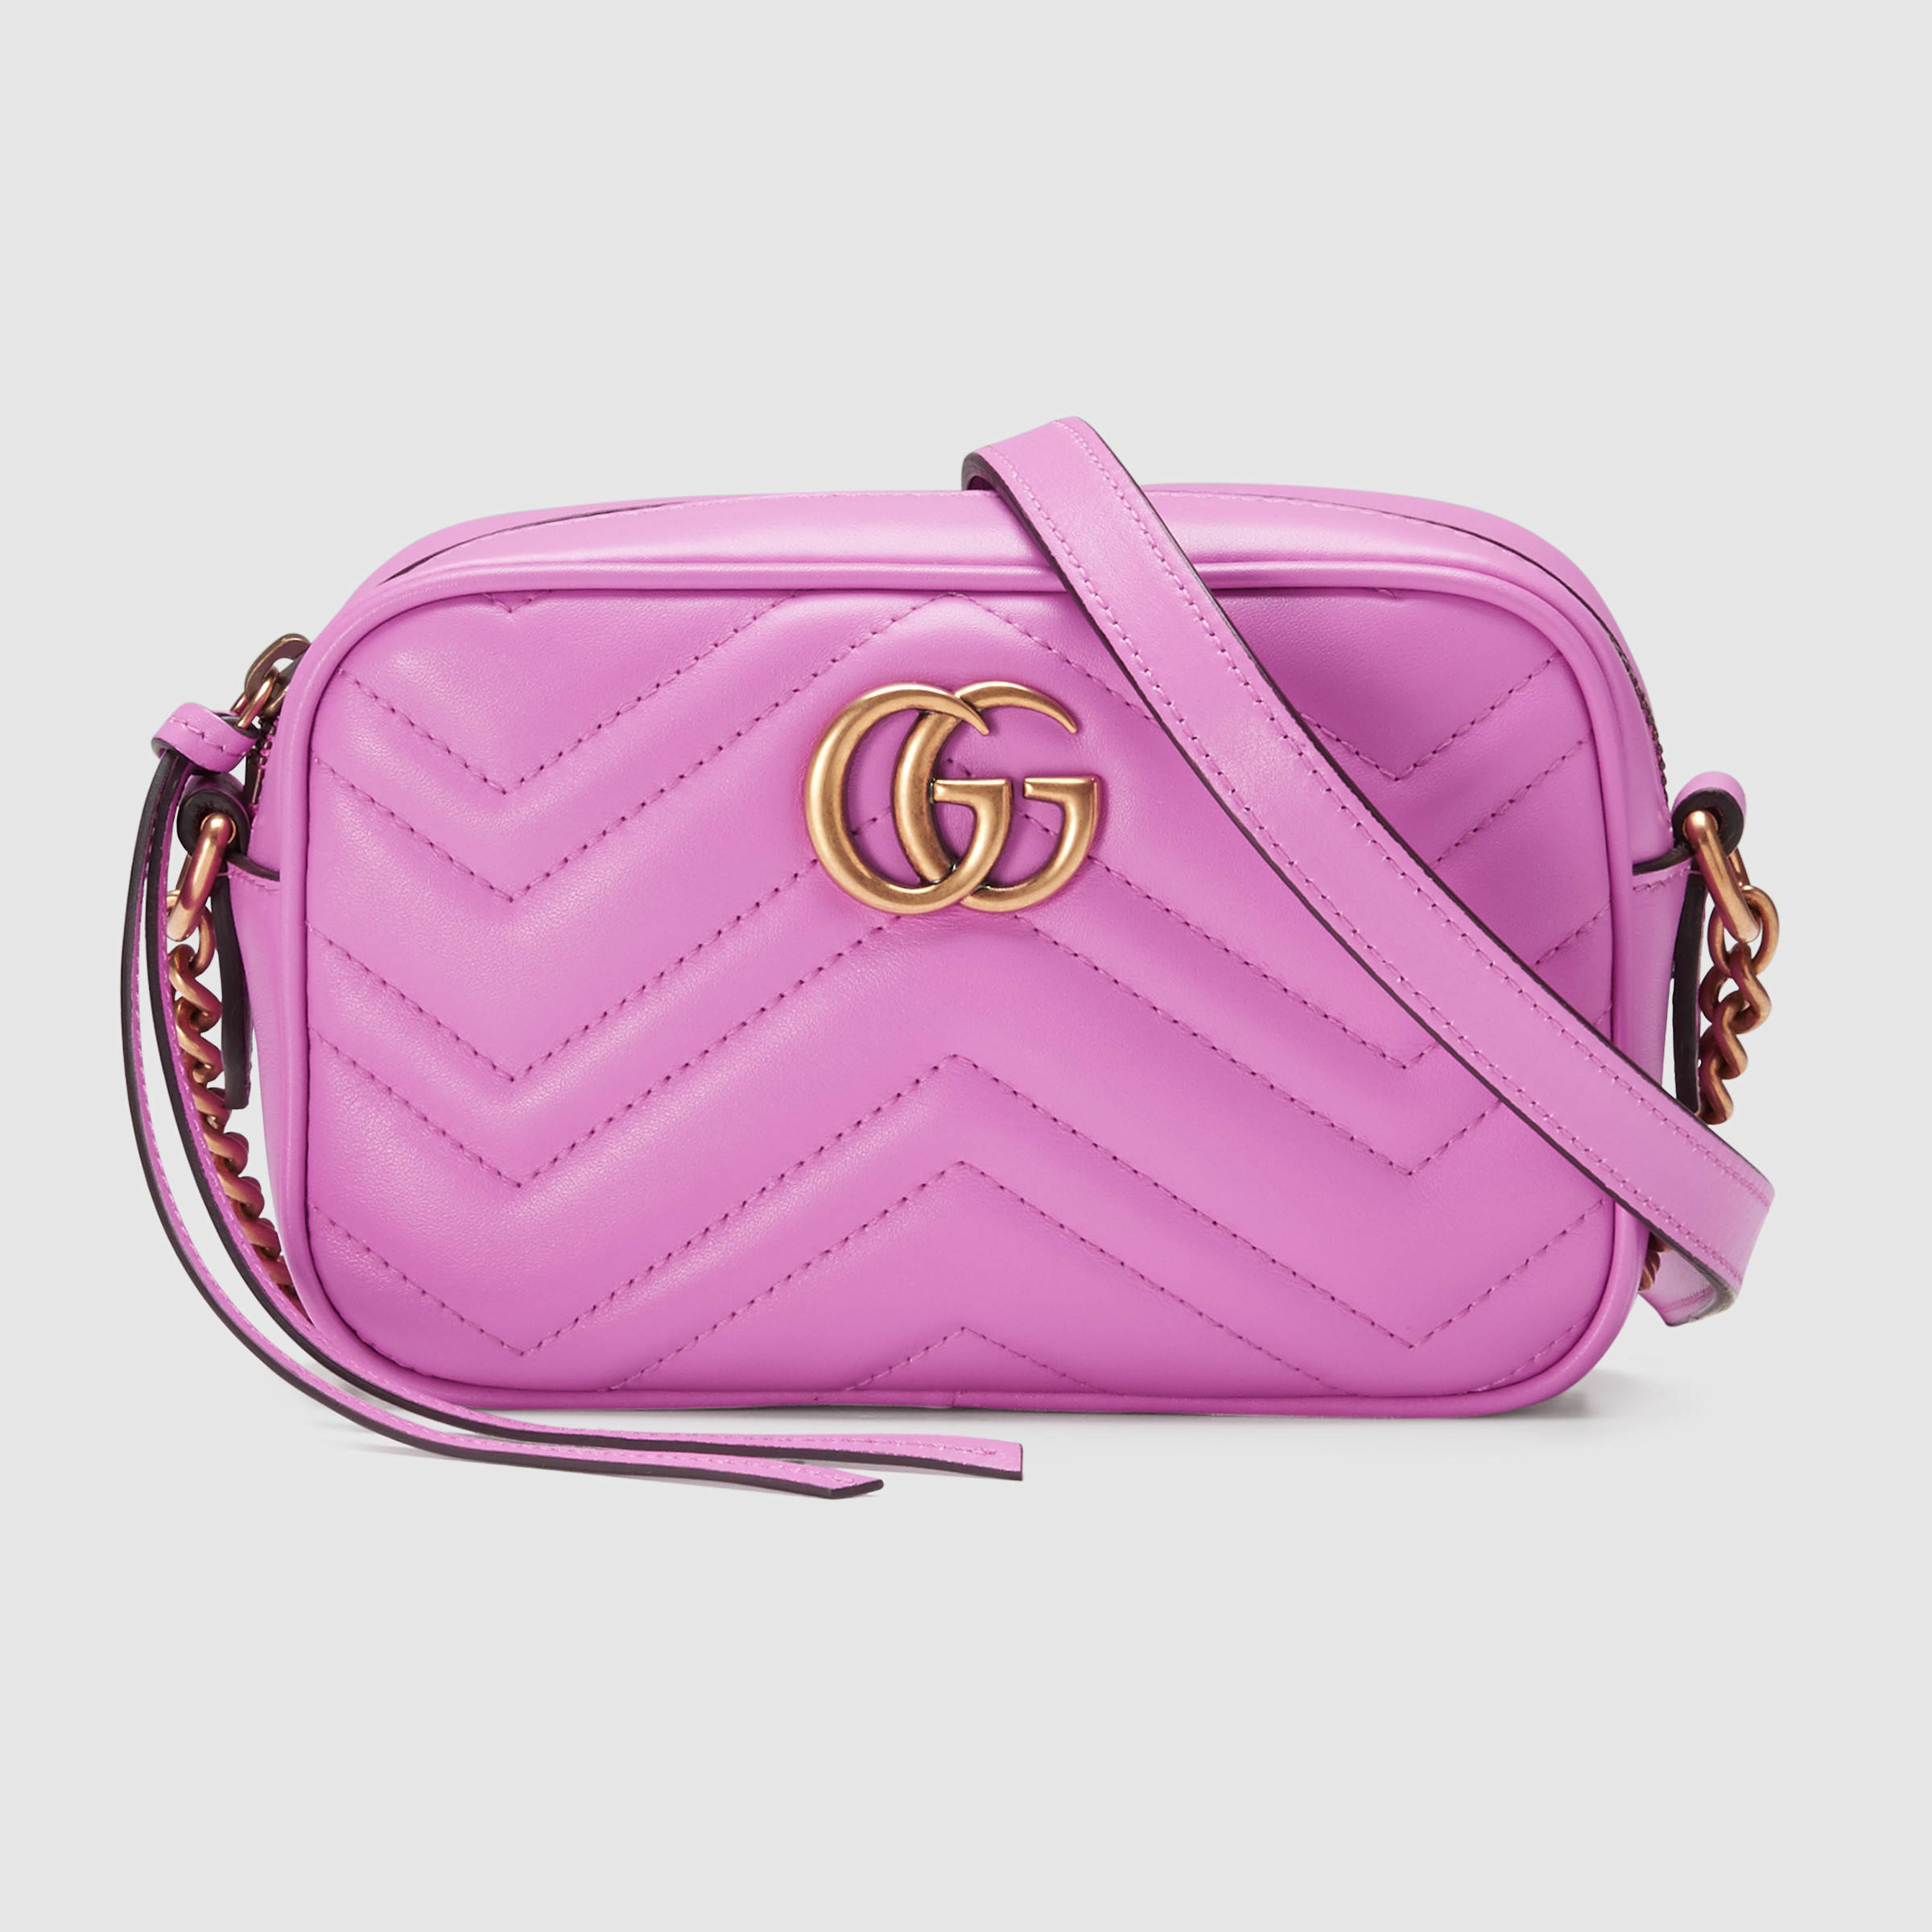 gucci marmont candy pink